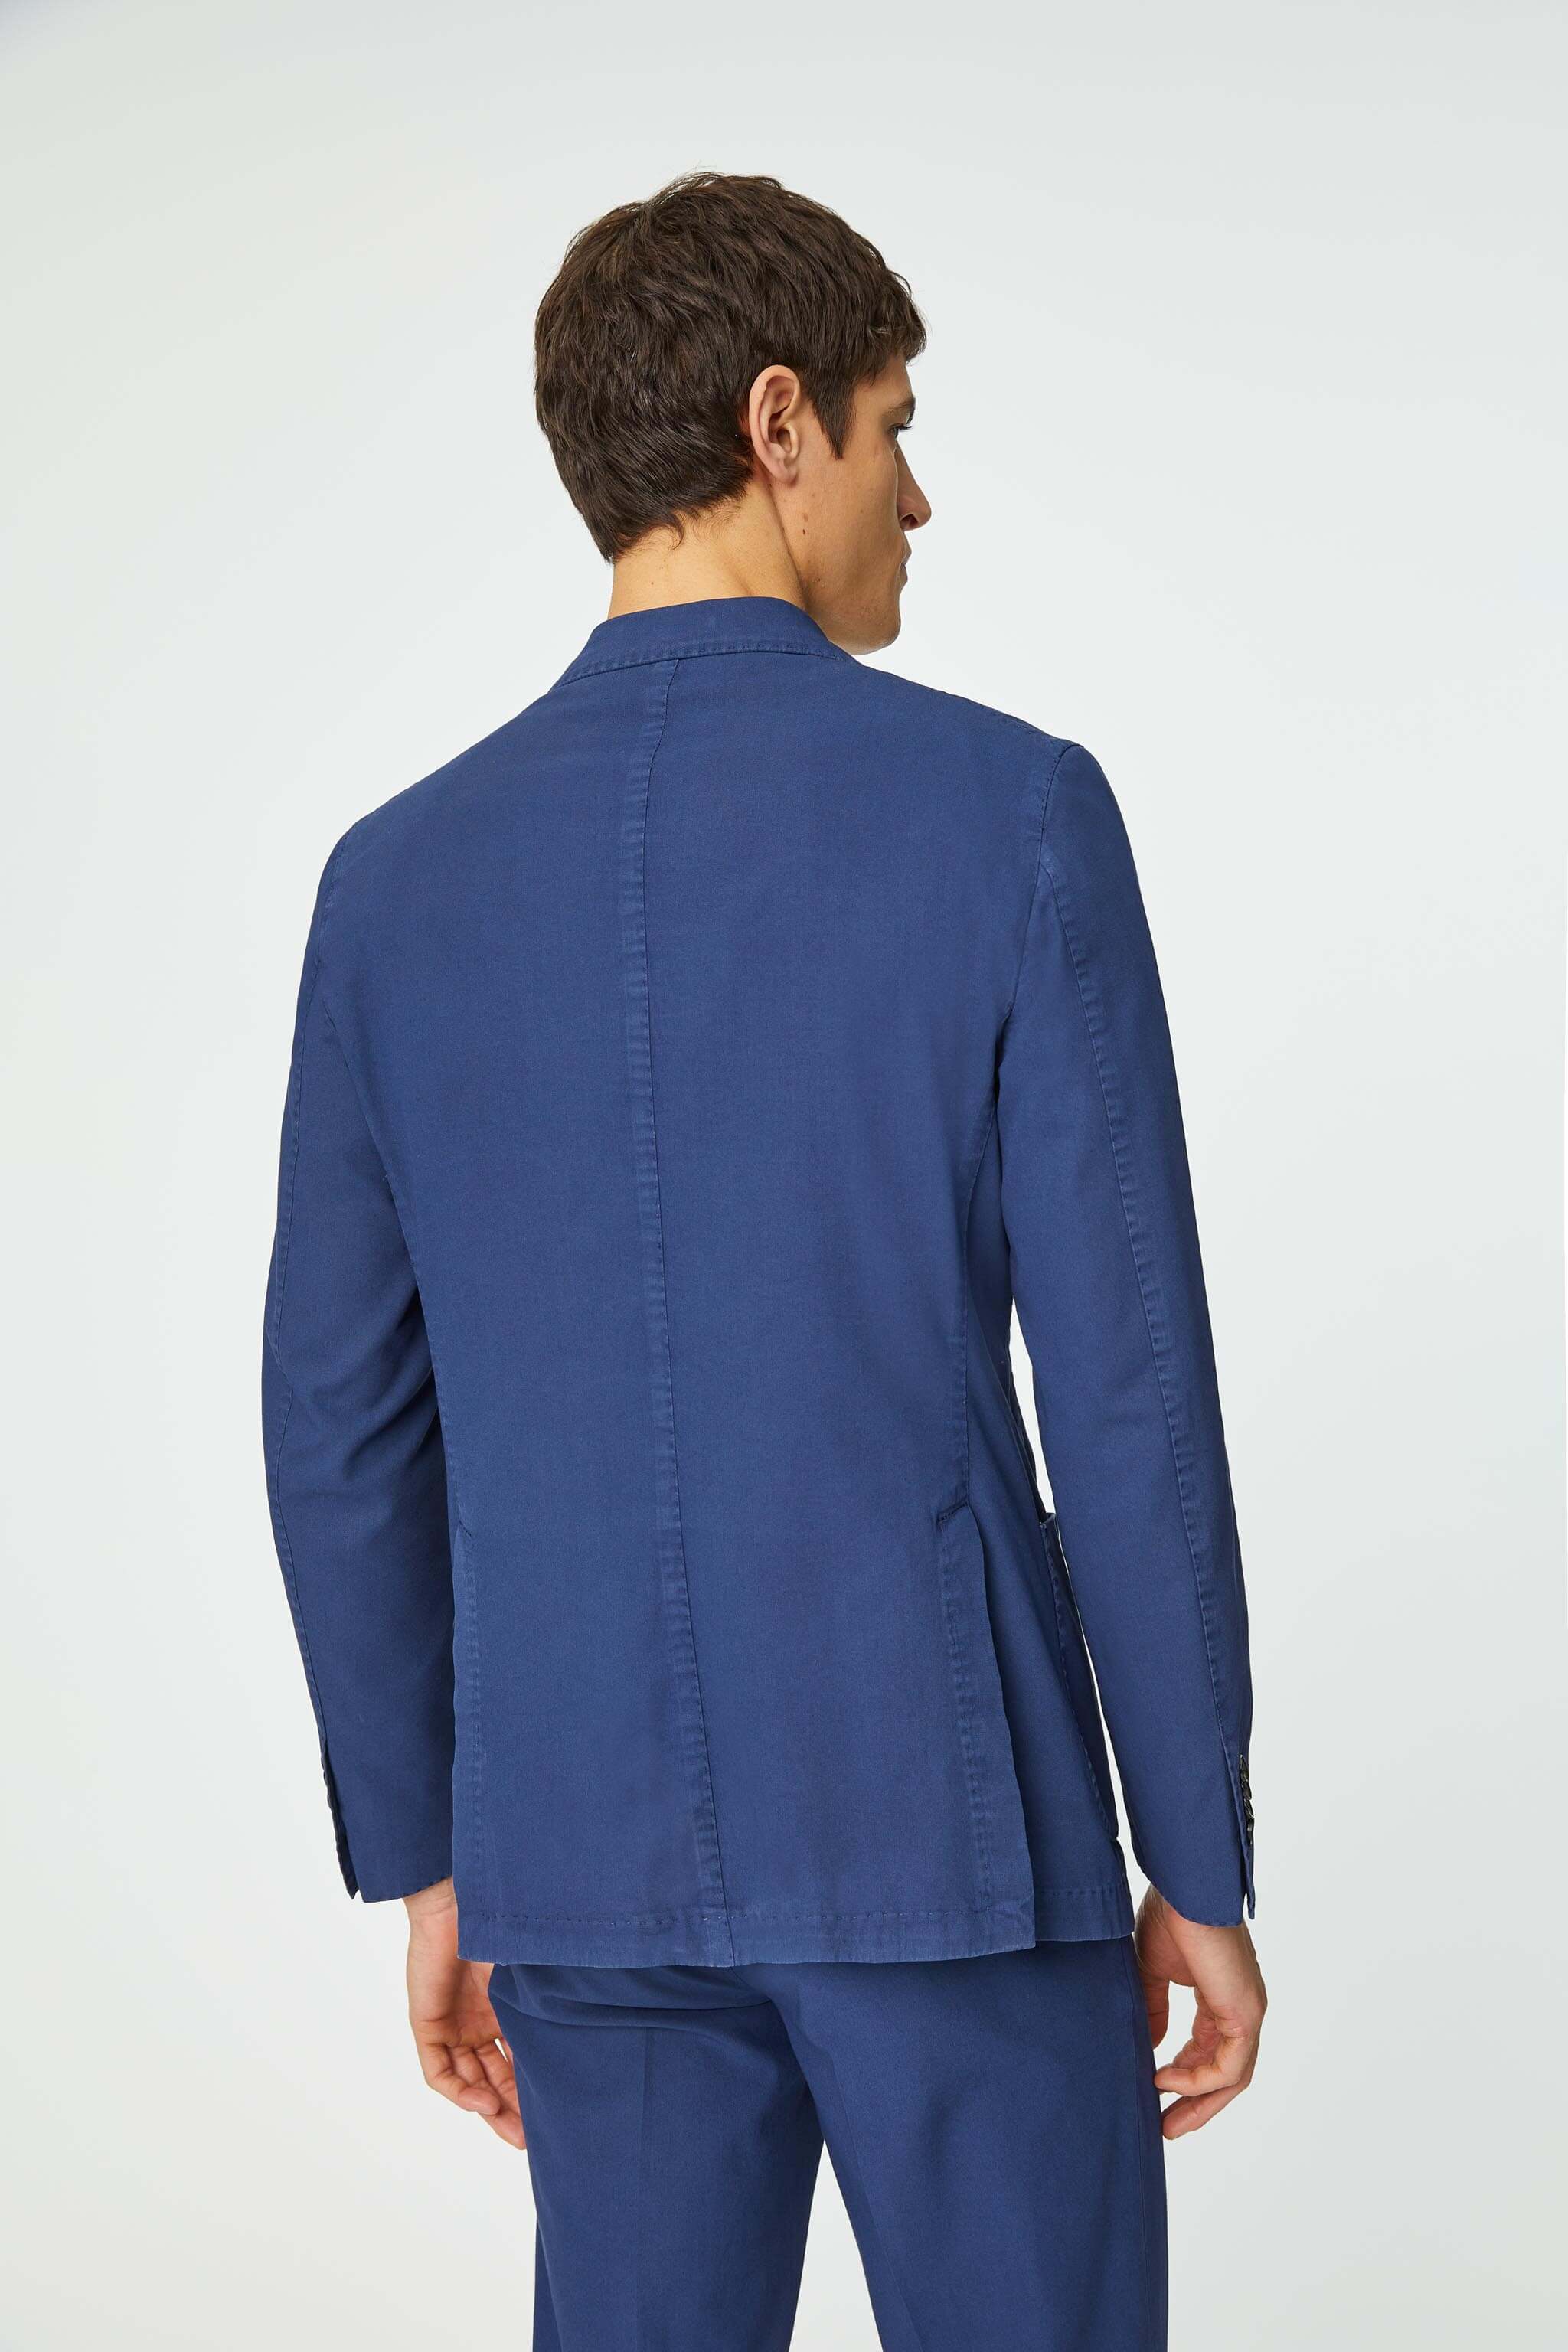 Garment-dyed TOM suit in navy